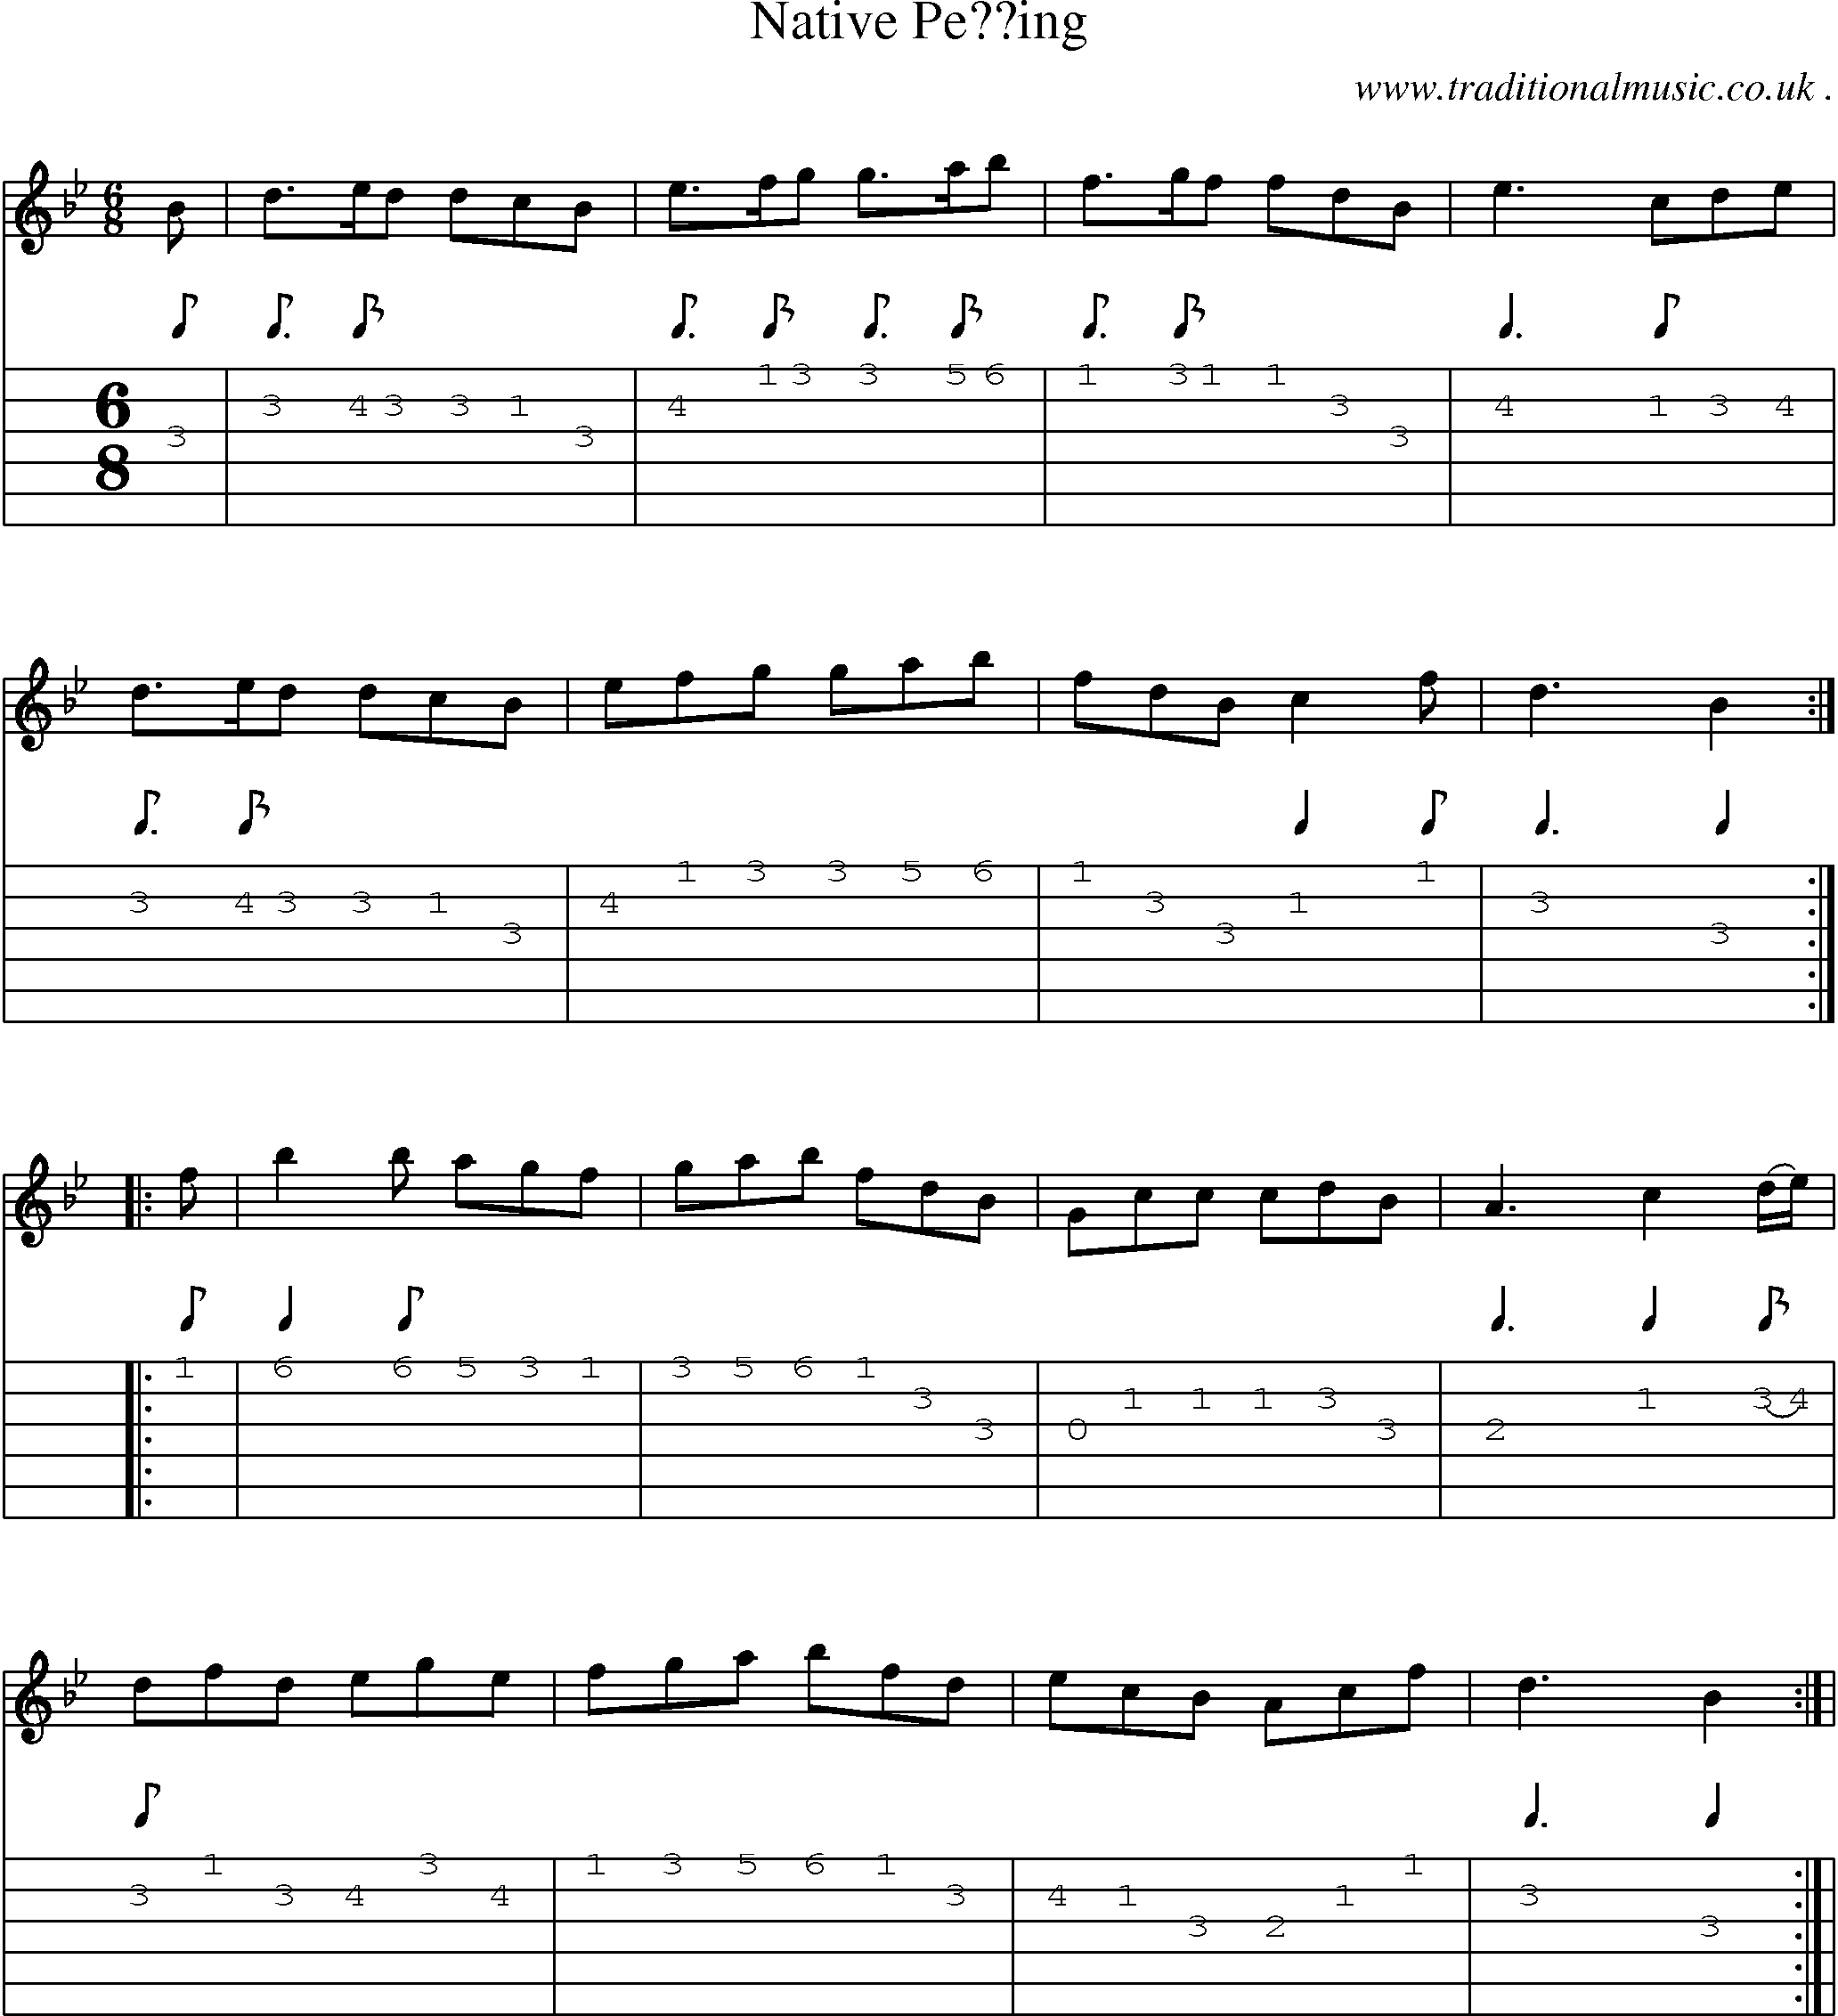 Sheet-Music and Guitar Tabs for Native Peing